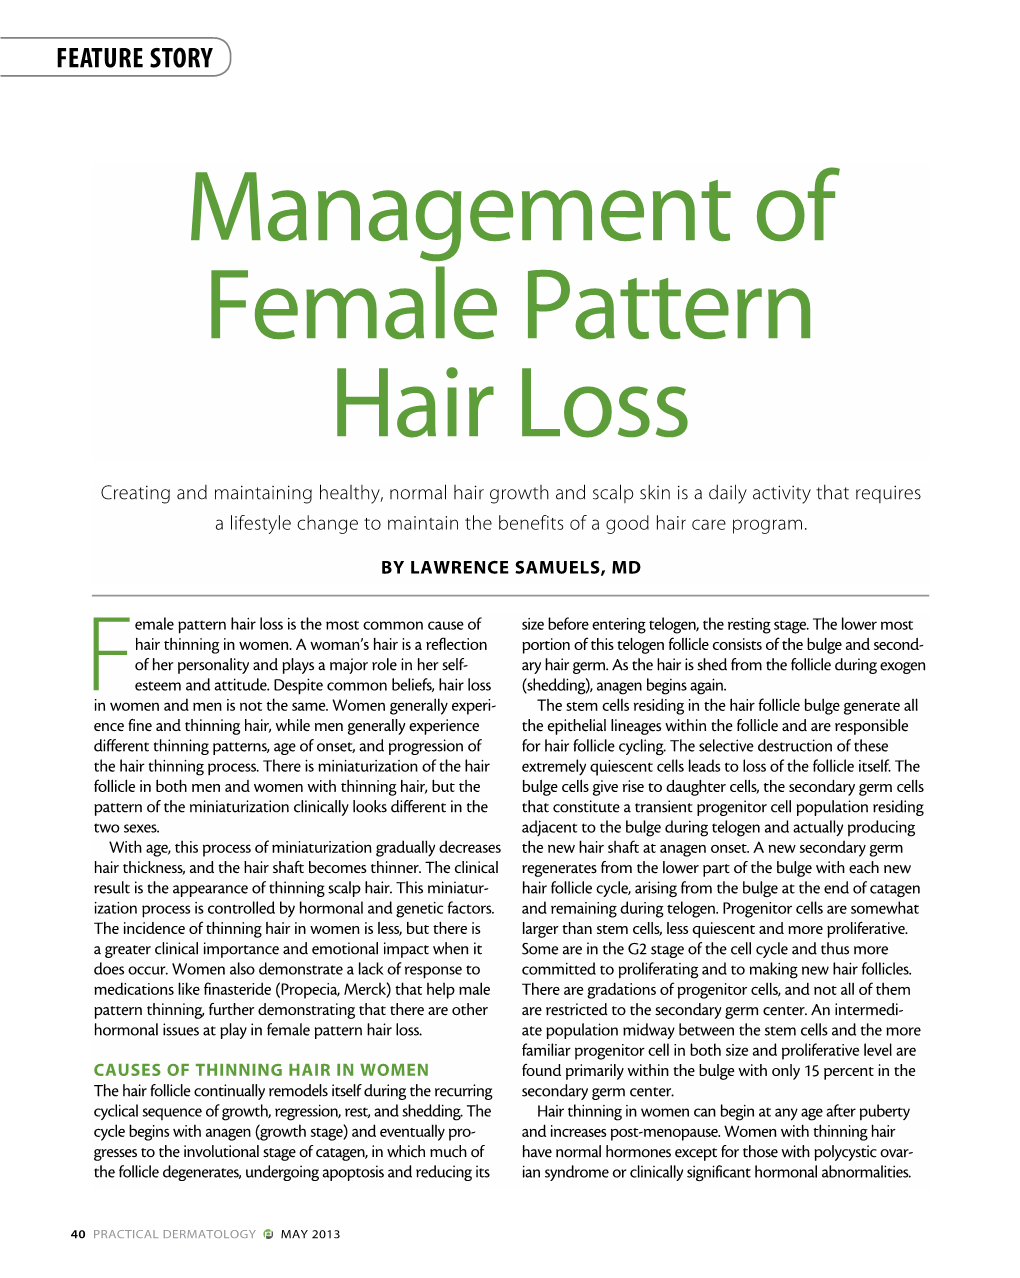 Management of Female Pattern Hair Loss